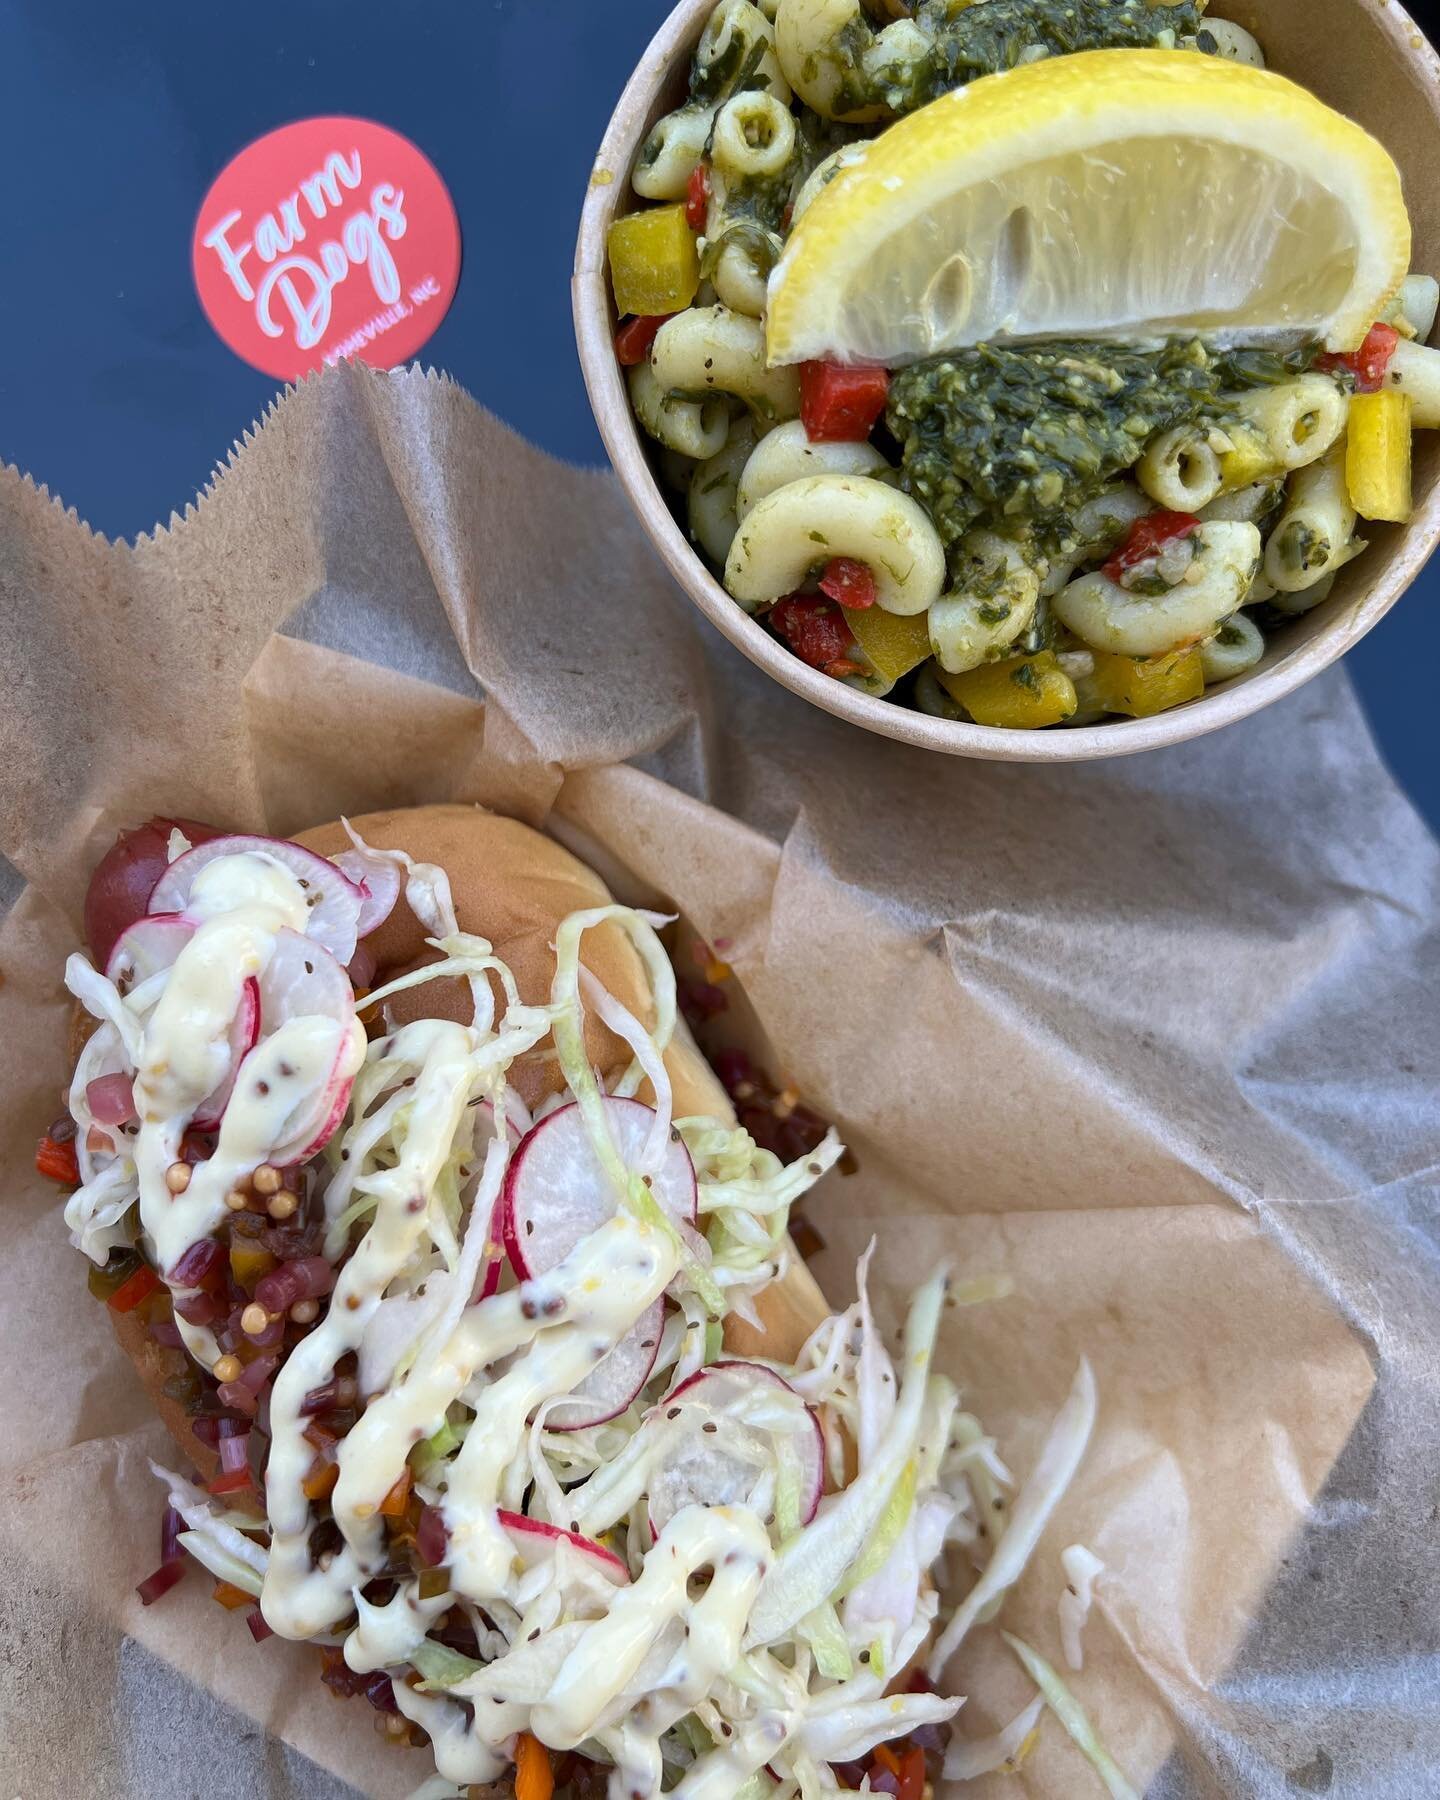 This weeks market offerings are so special to us! 
&bull;
Our market dog this week is a @hickorynutgap hot dog topped with a sweet pepper ramp relish with sustainably foraged ramps from our friends over at @r_farm_organics , a lemon honey slaw with r